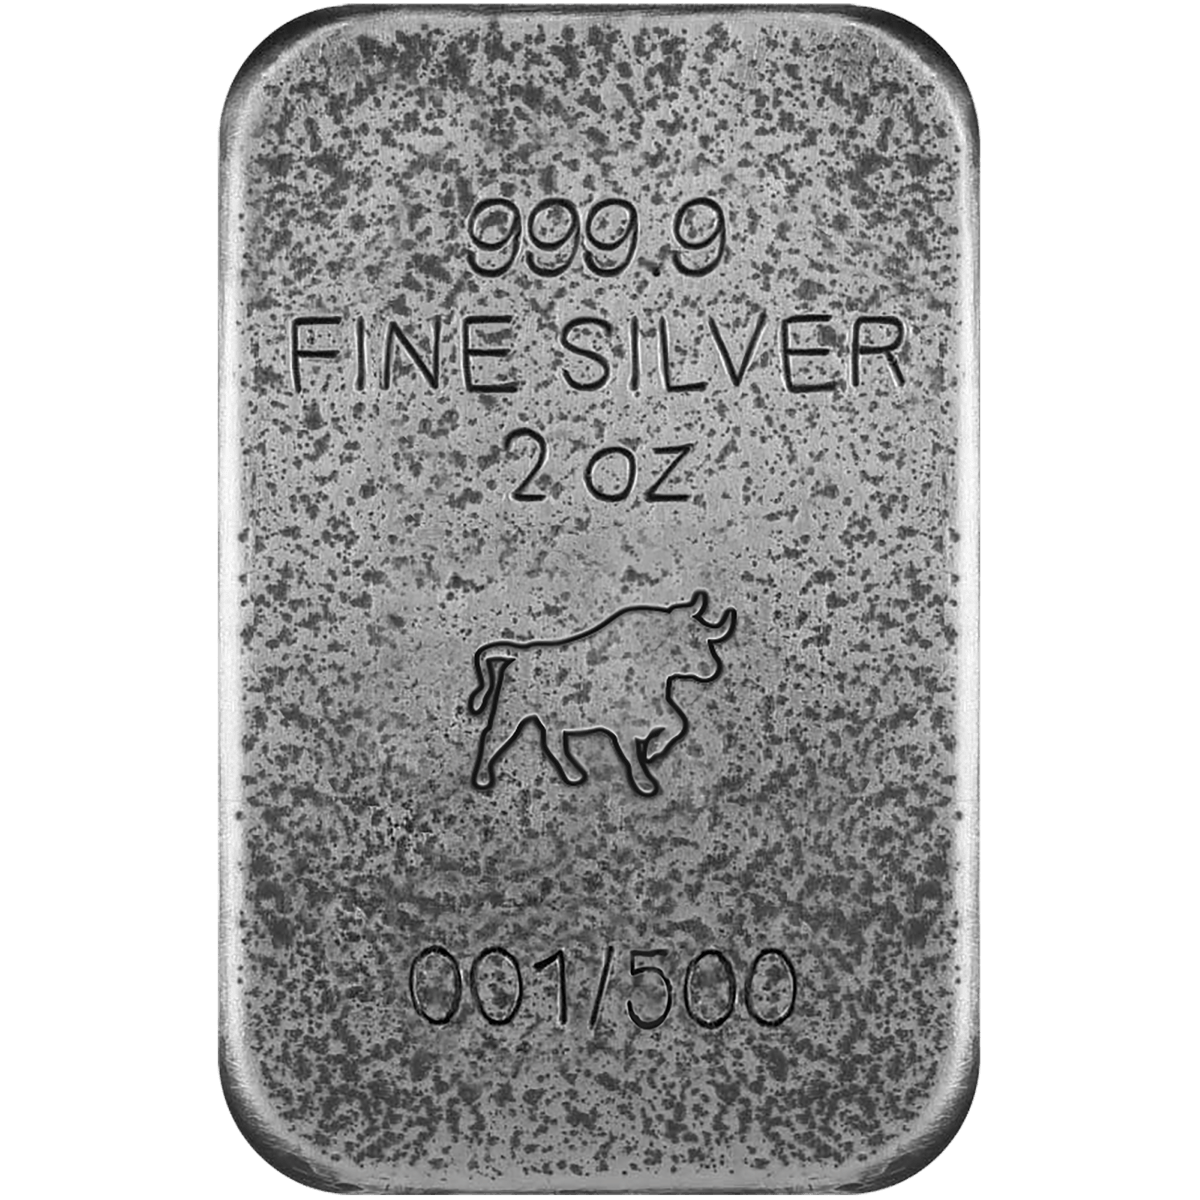 grreserve.com/product/mints/…

#silvercoins #silver #coins #silvercoin #coincollecting #numismatics #bullion #silverbullion #gold #coin #silverstacker #silverstacking #coincollector #coincollection #rarecoins #coinscollection #Vanity